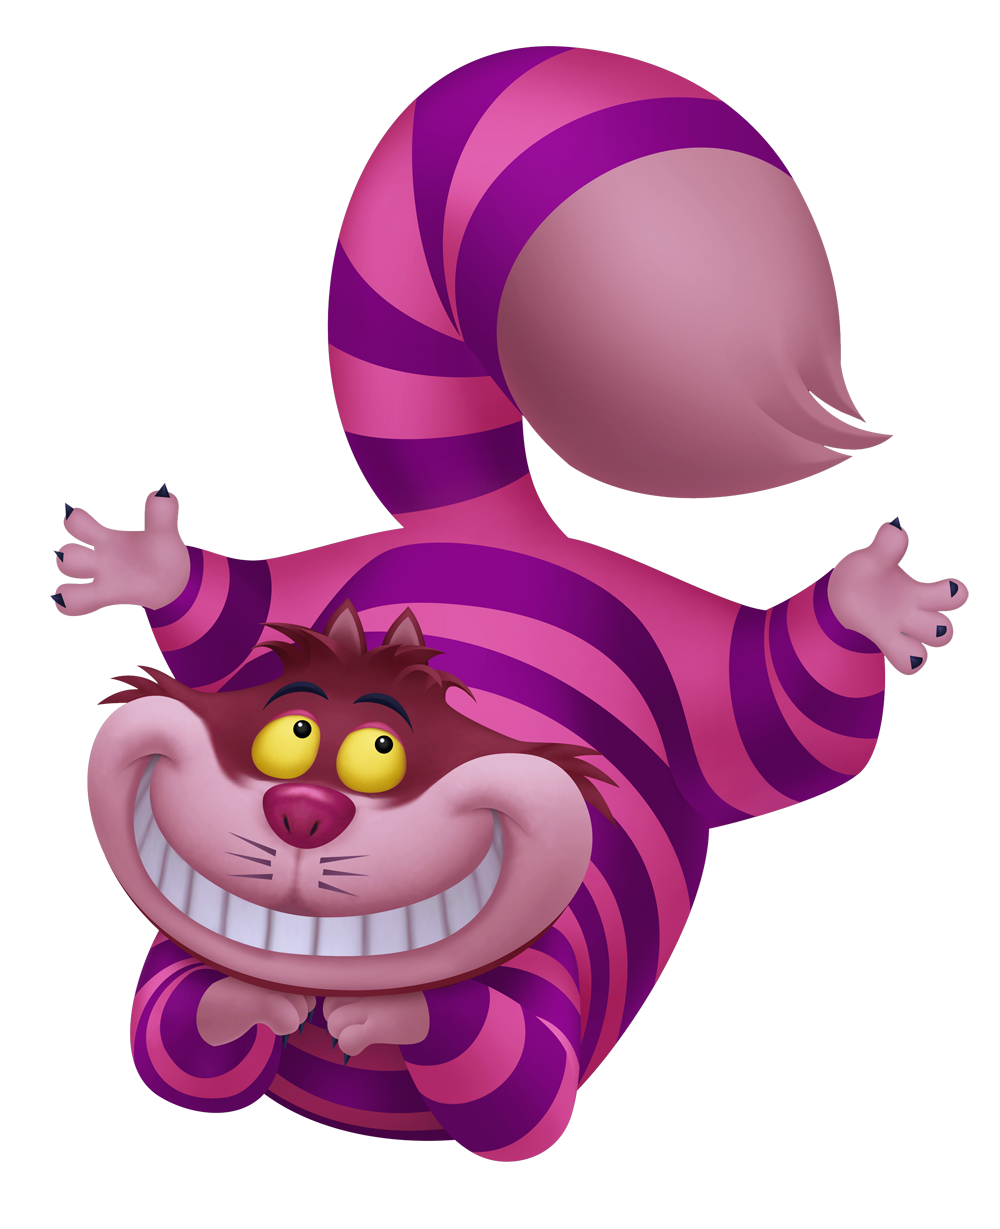 Download PNG image - Cheshire Cat PNG Transparent Picture 